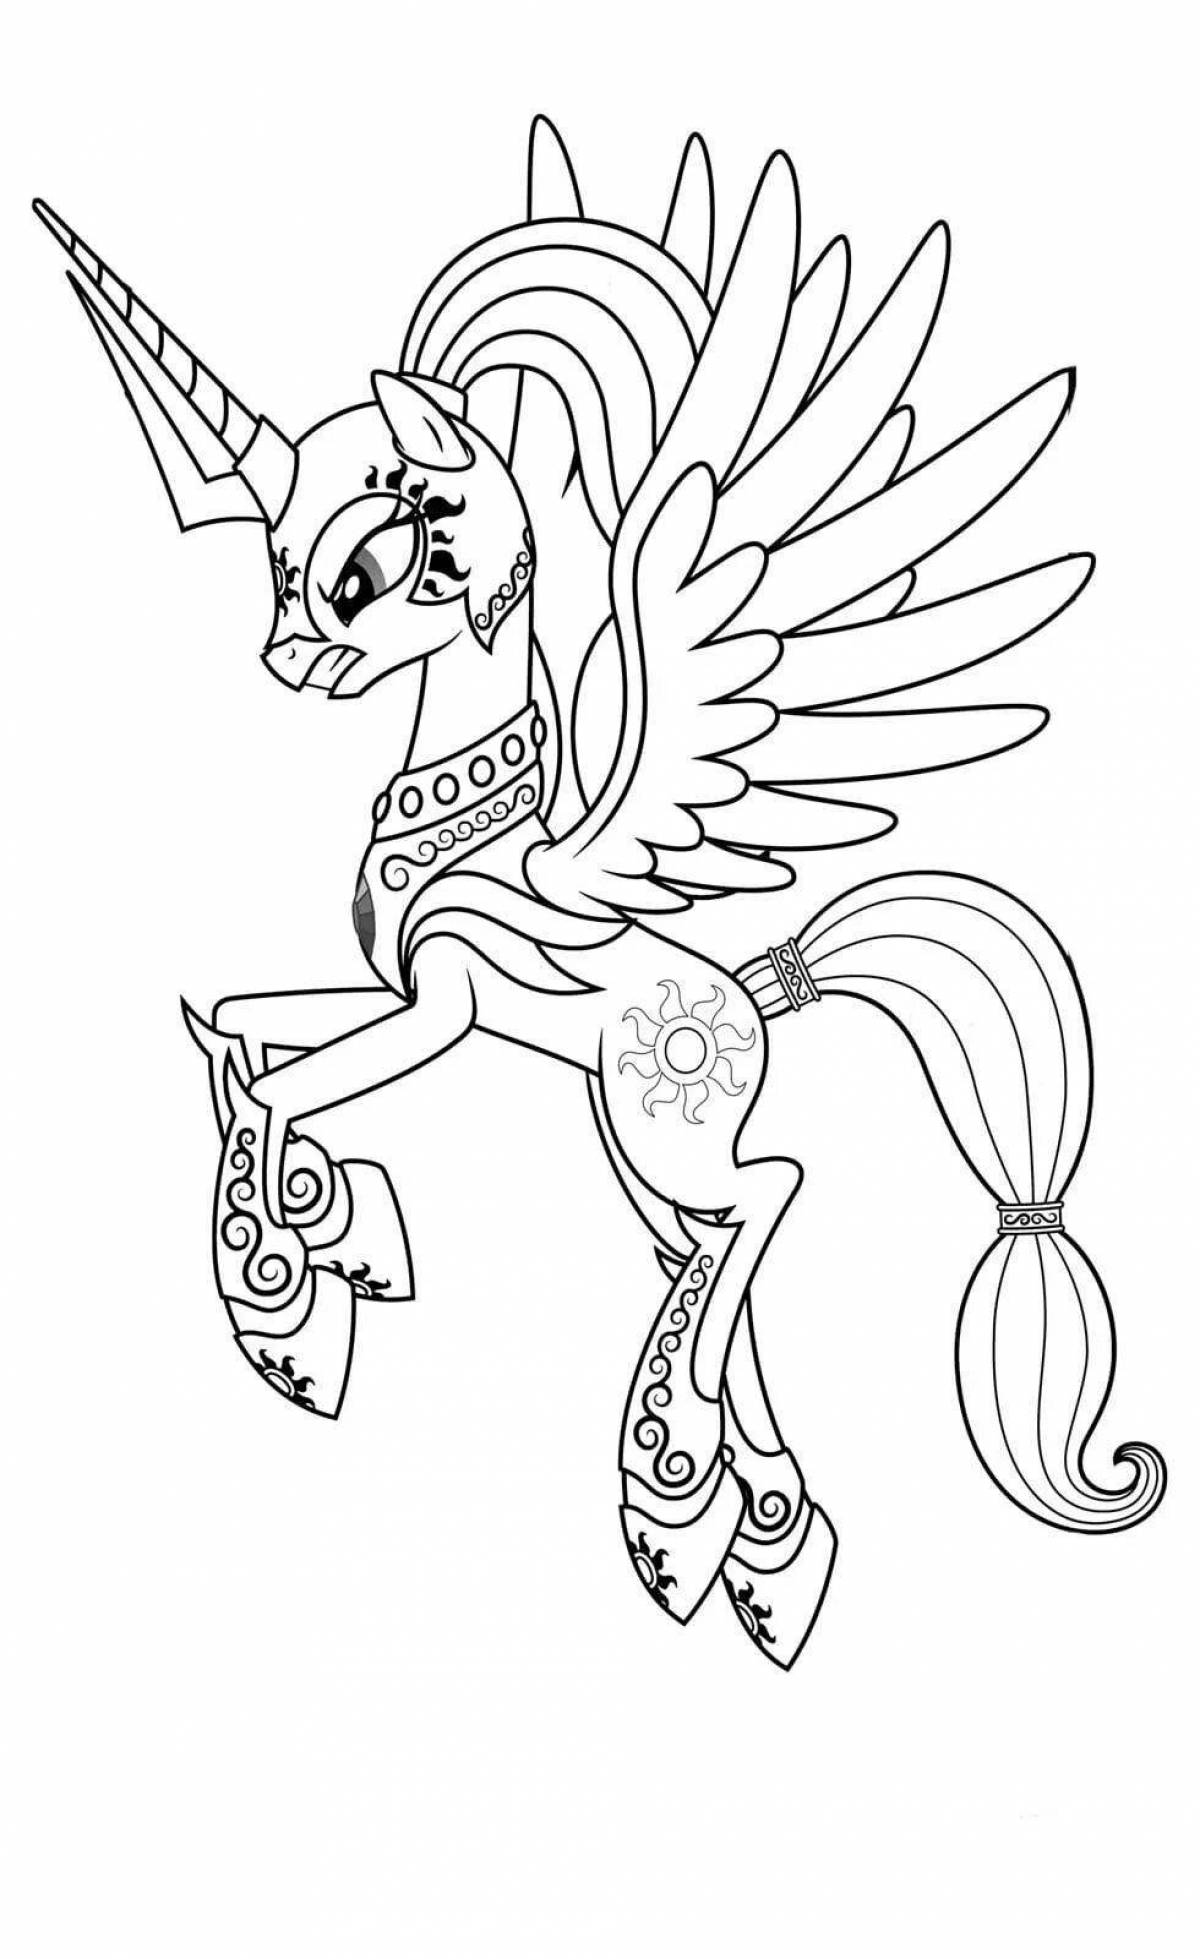 Unwanted my little pony coloring book